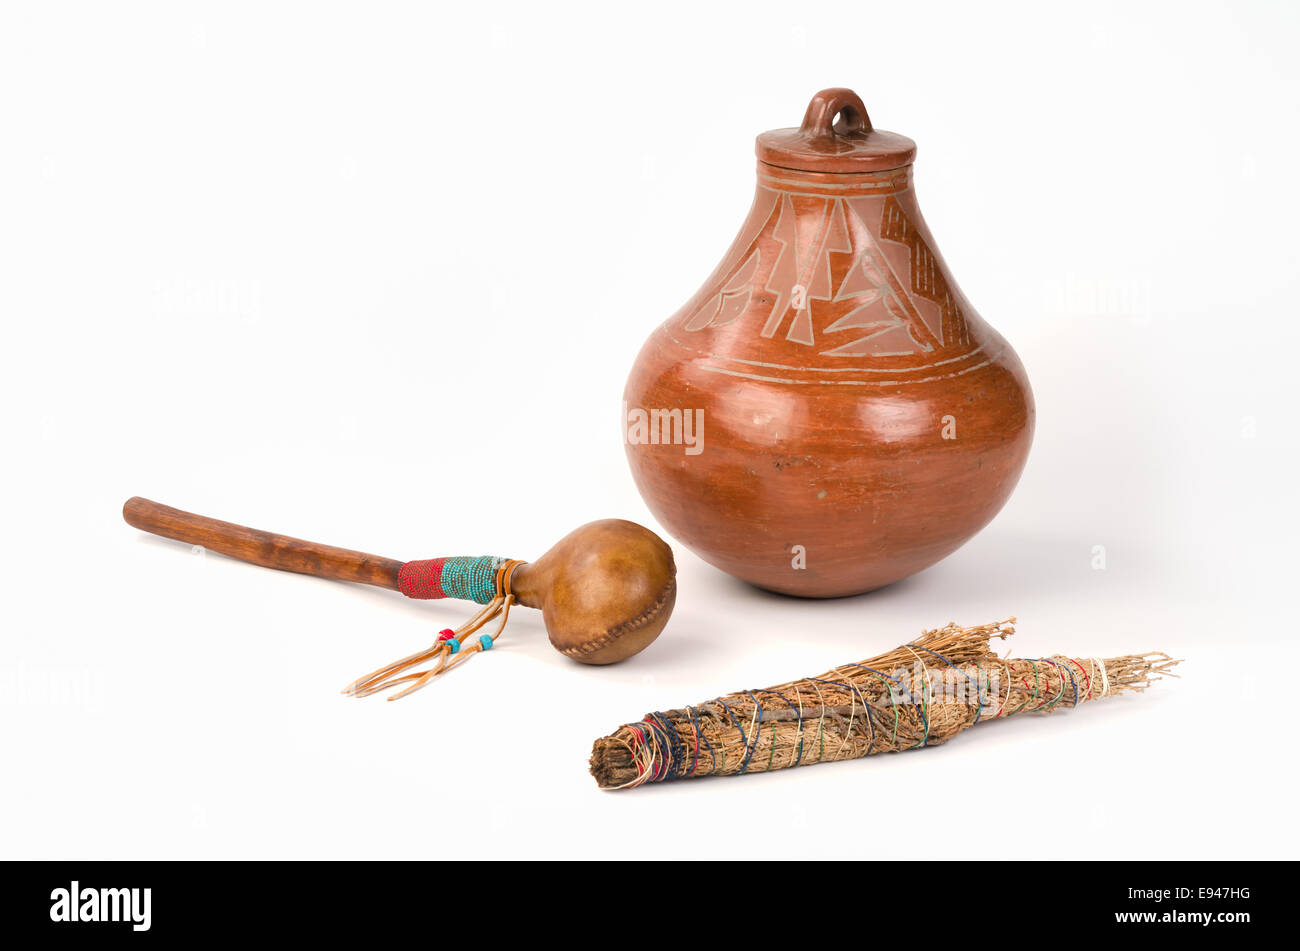 Native American Pueblo Pottery with Smudge Stick and Shaker. Stock Photo